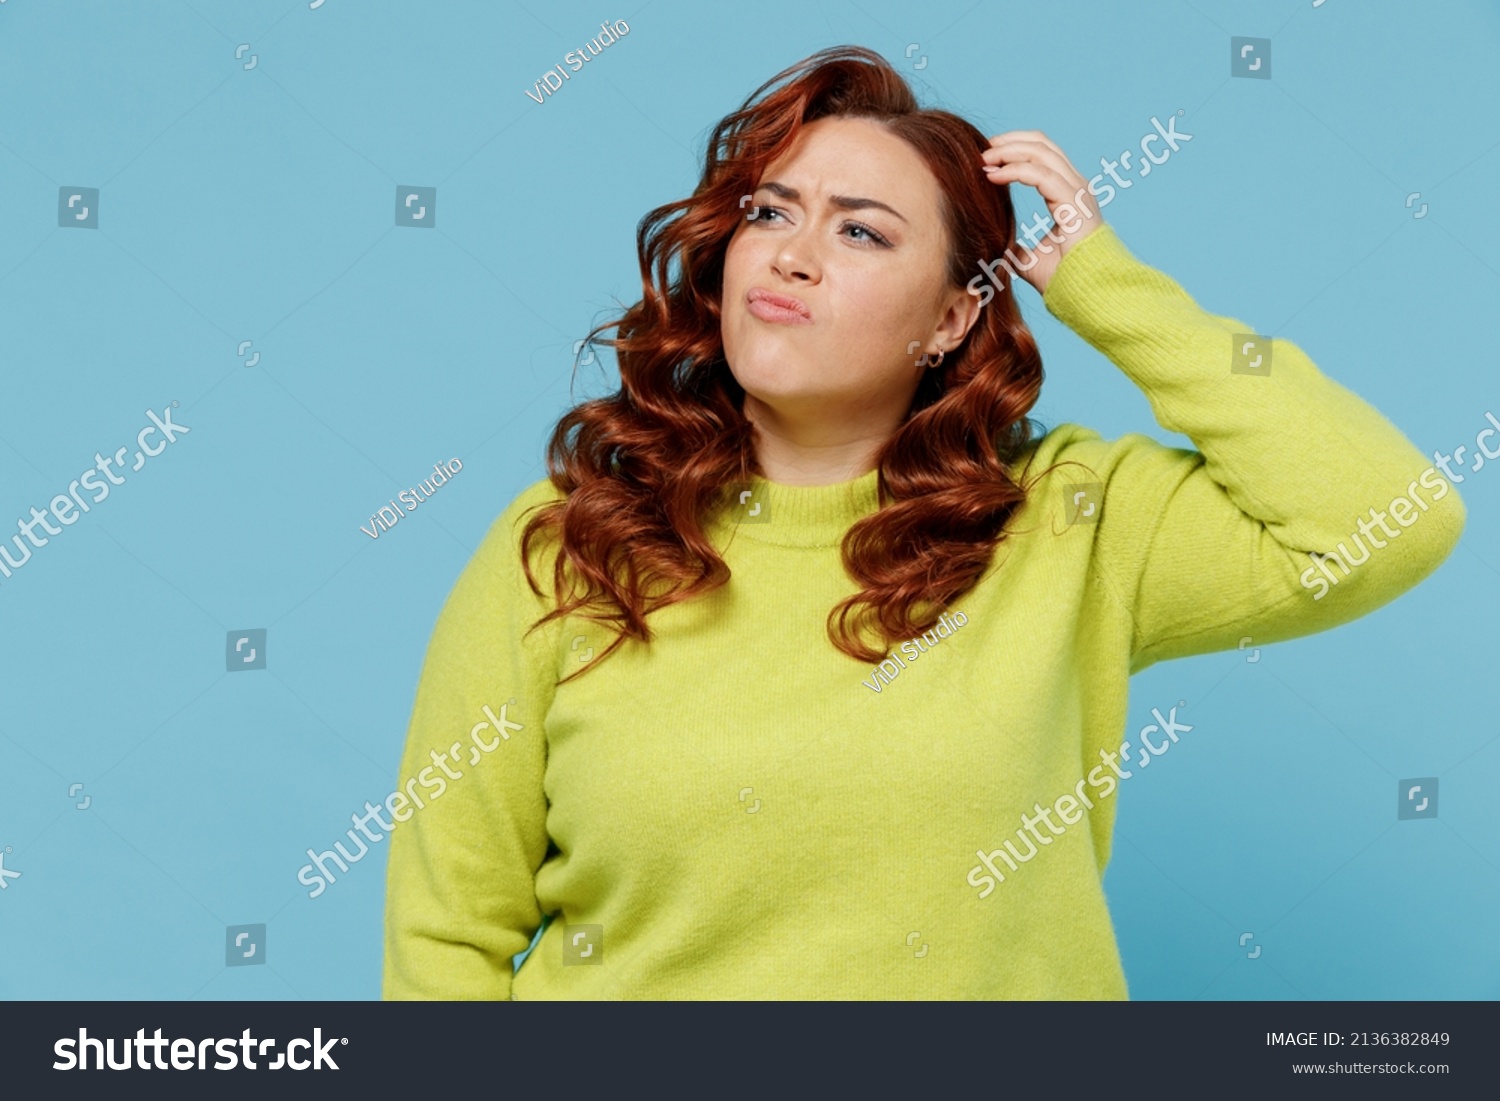 Young puzzled thoughtful confused chubby overweight plus size big fat fit woman wear green sweater look aside scratch head isolated on plain blue background studio portrait. People lifestyle concept #2136382849